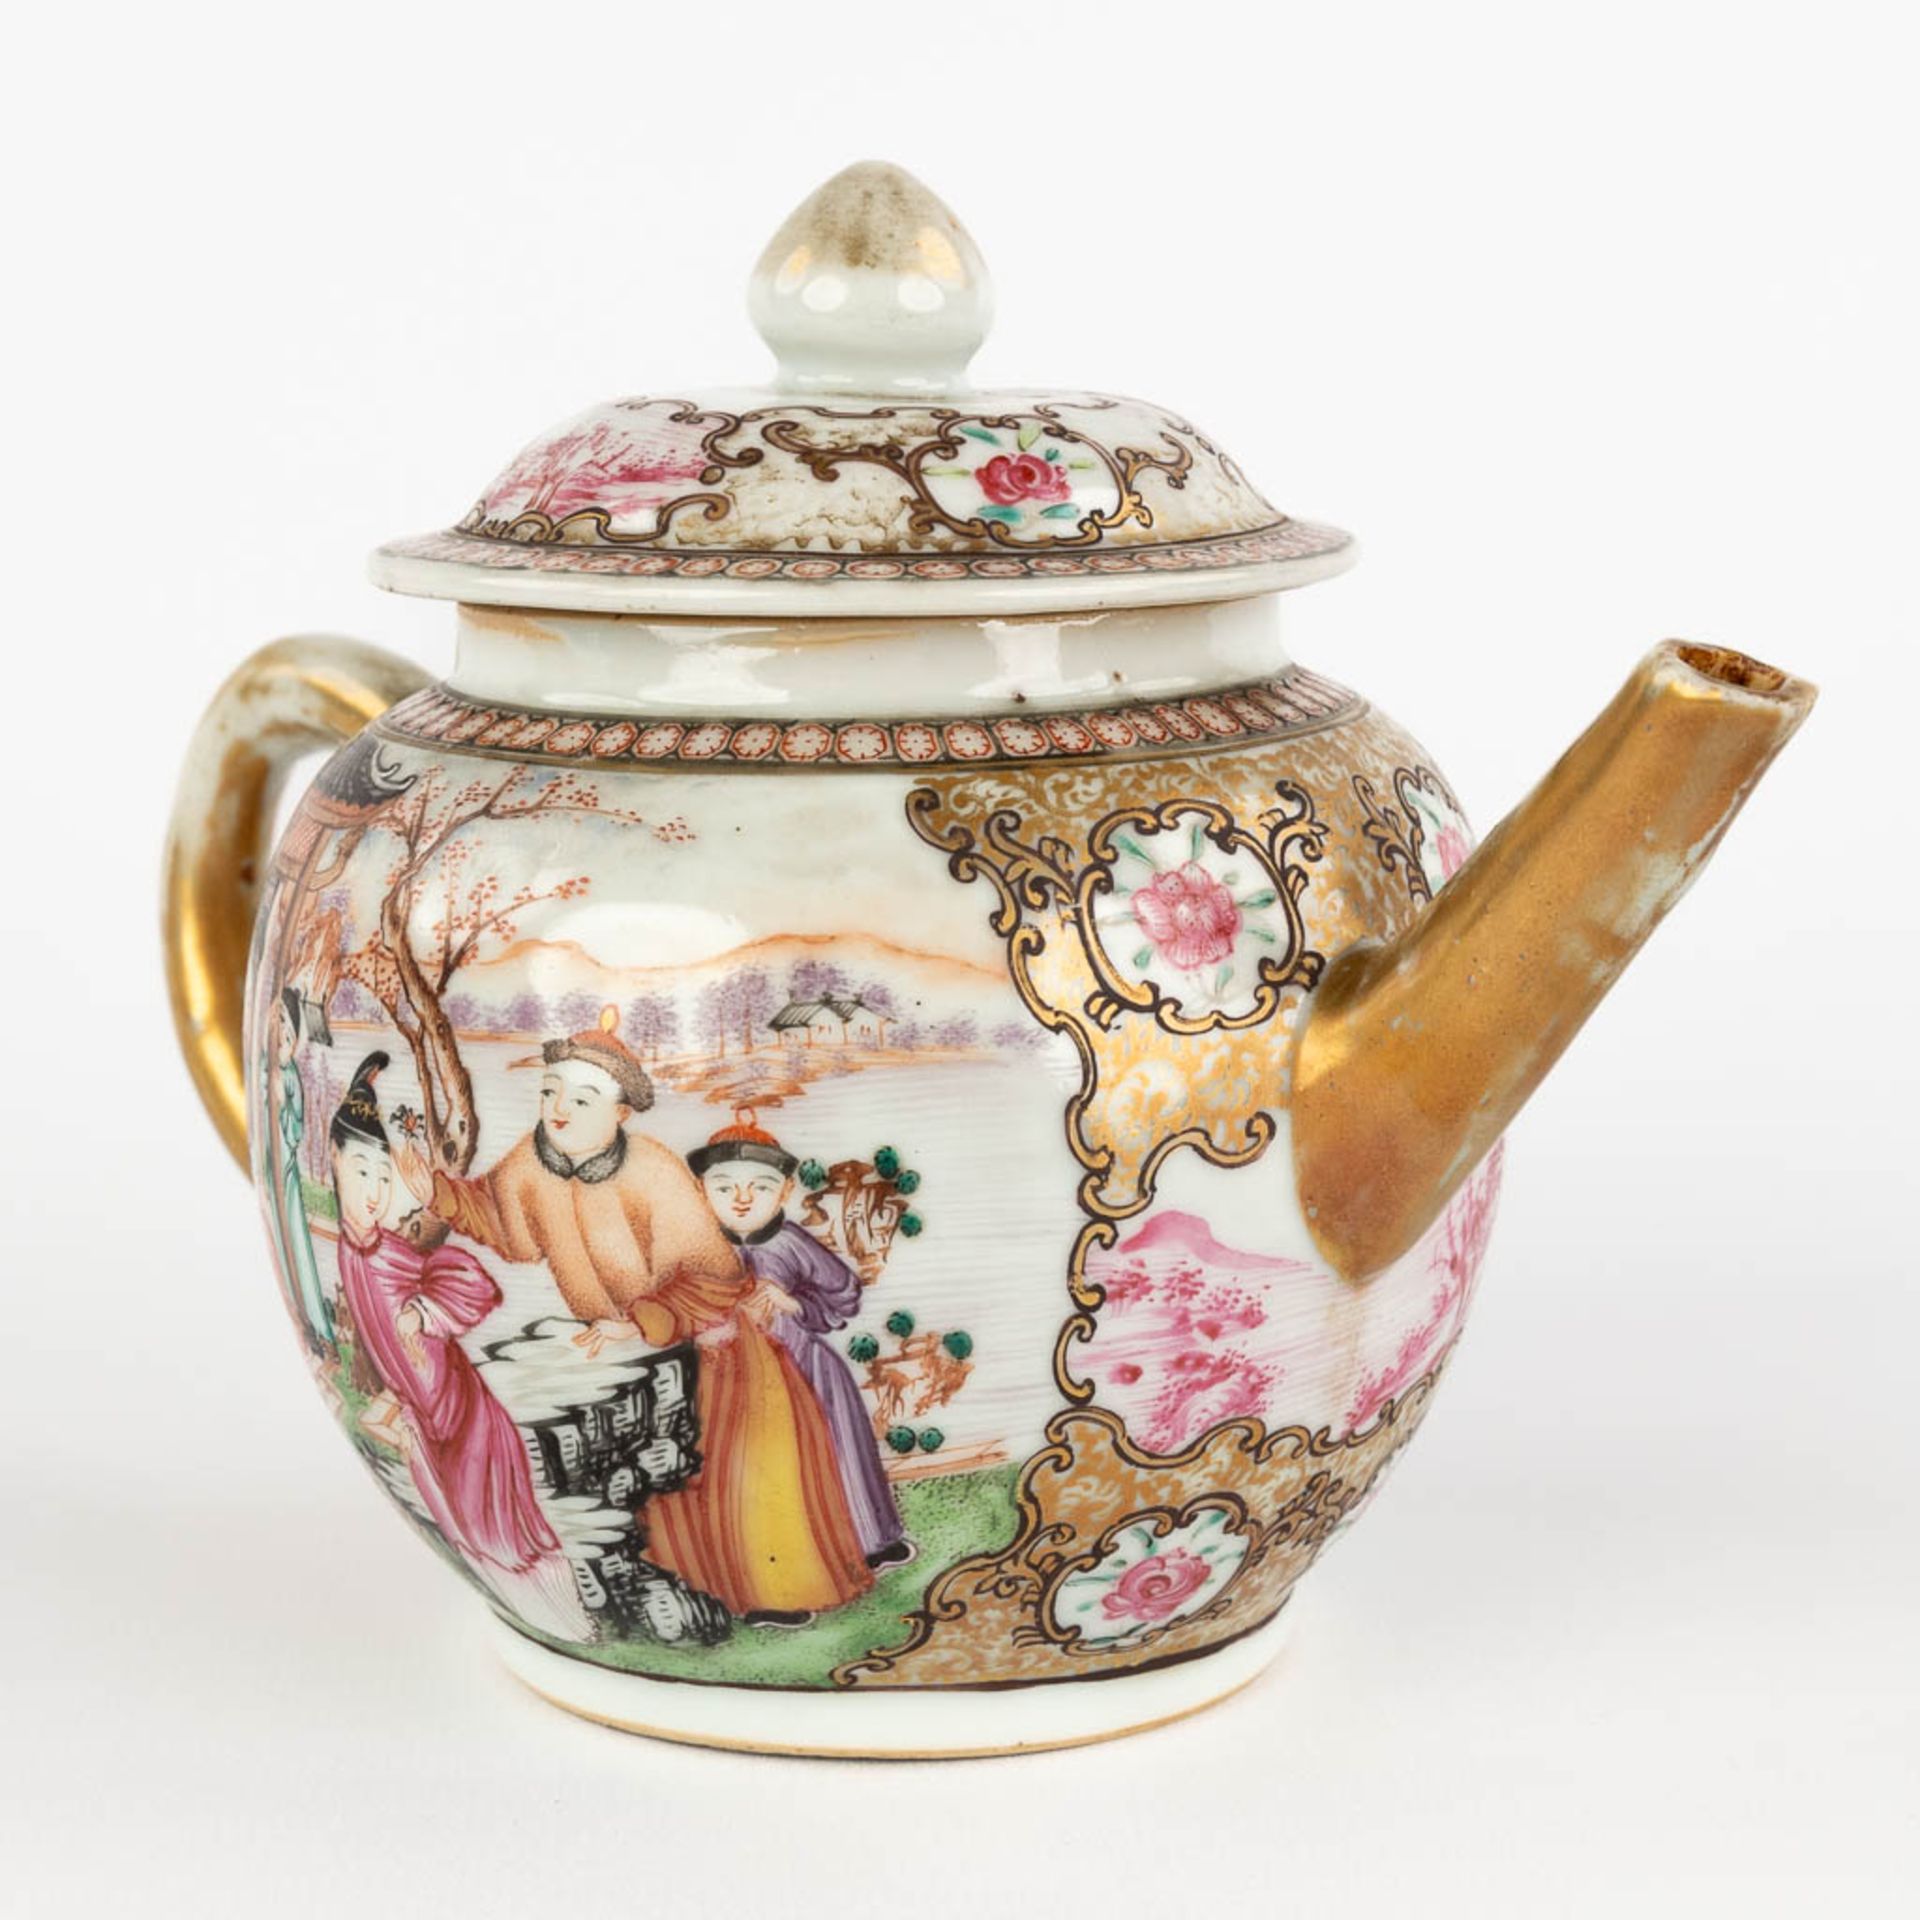 An antique Chinese Famille Rose teapot with a Family Scne, Qinalong, 18th C. (L:11 x W:20 x H:12,5 - Image 4 of 12